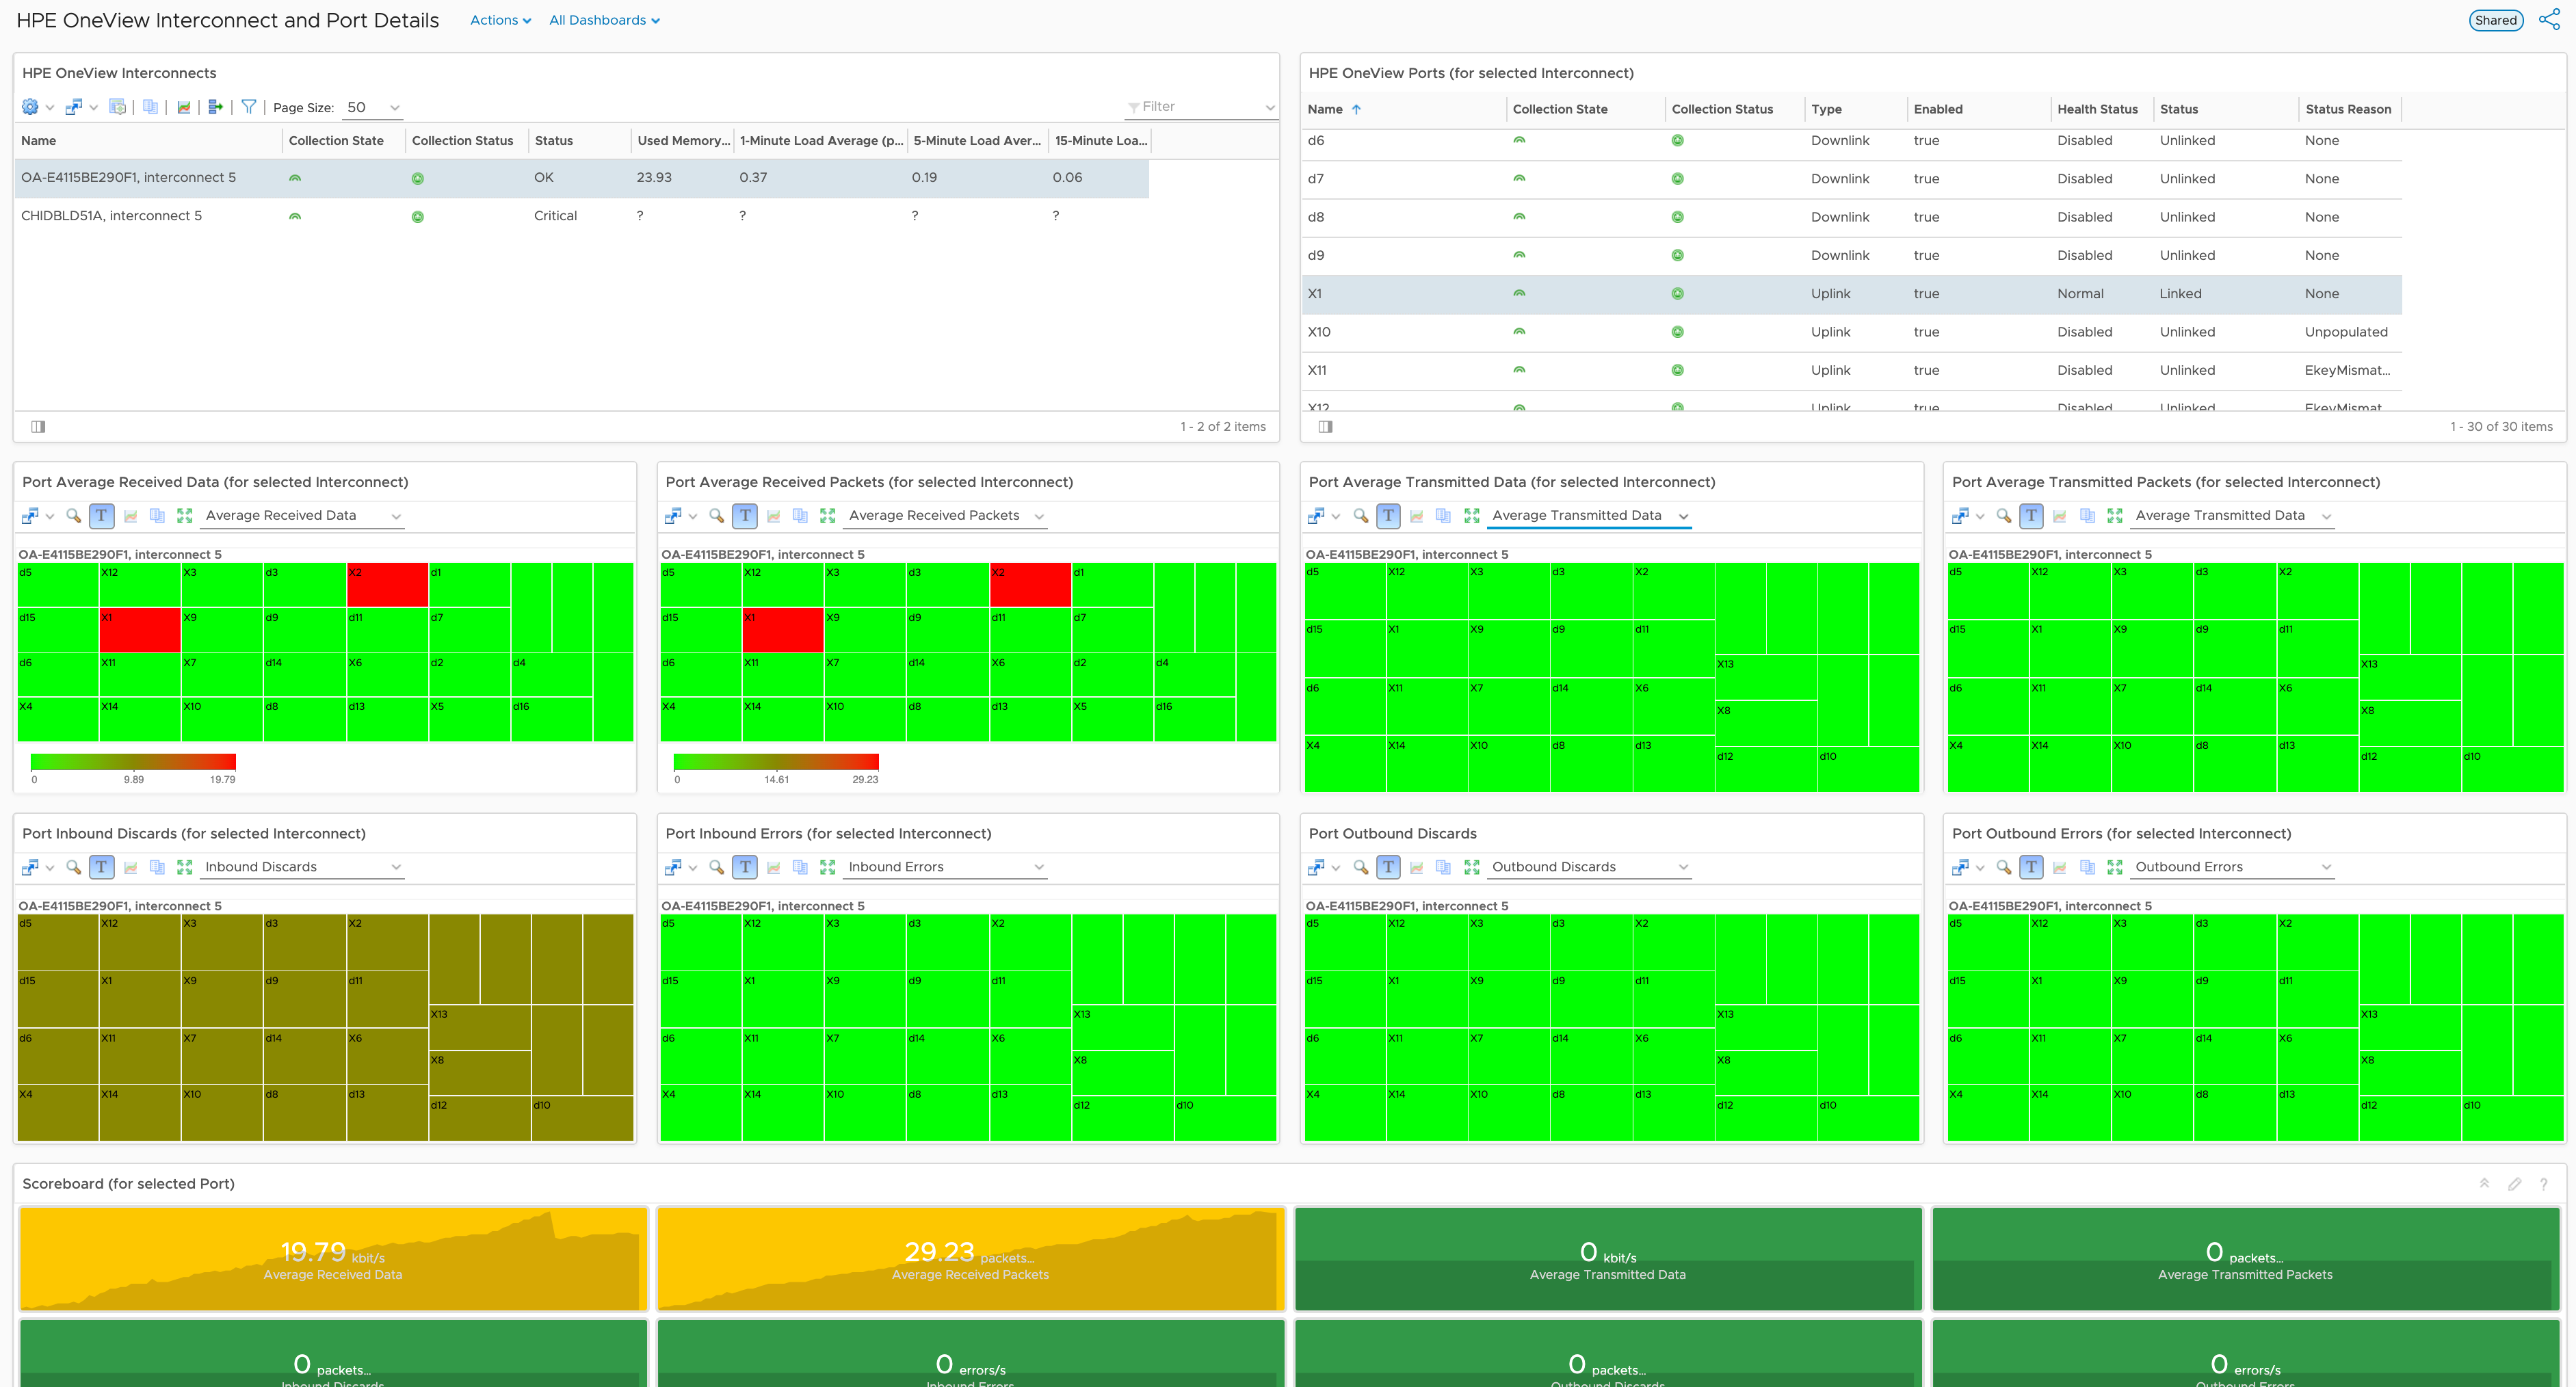 005_hpe_oneview_interconnect_and_port_details_dashboard